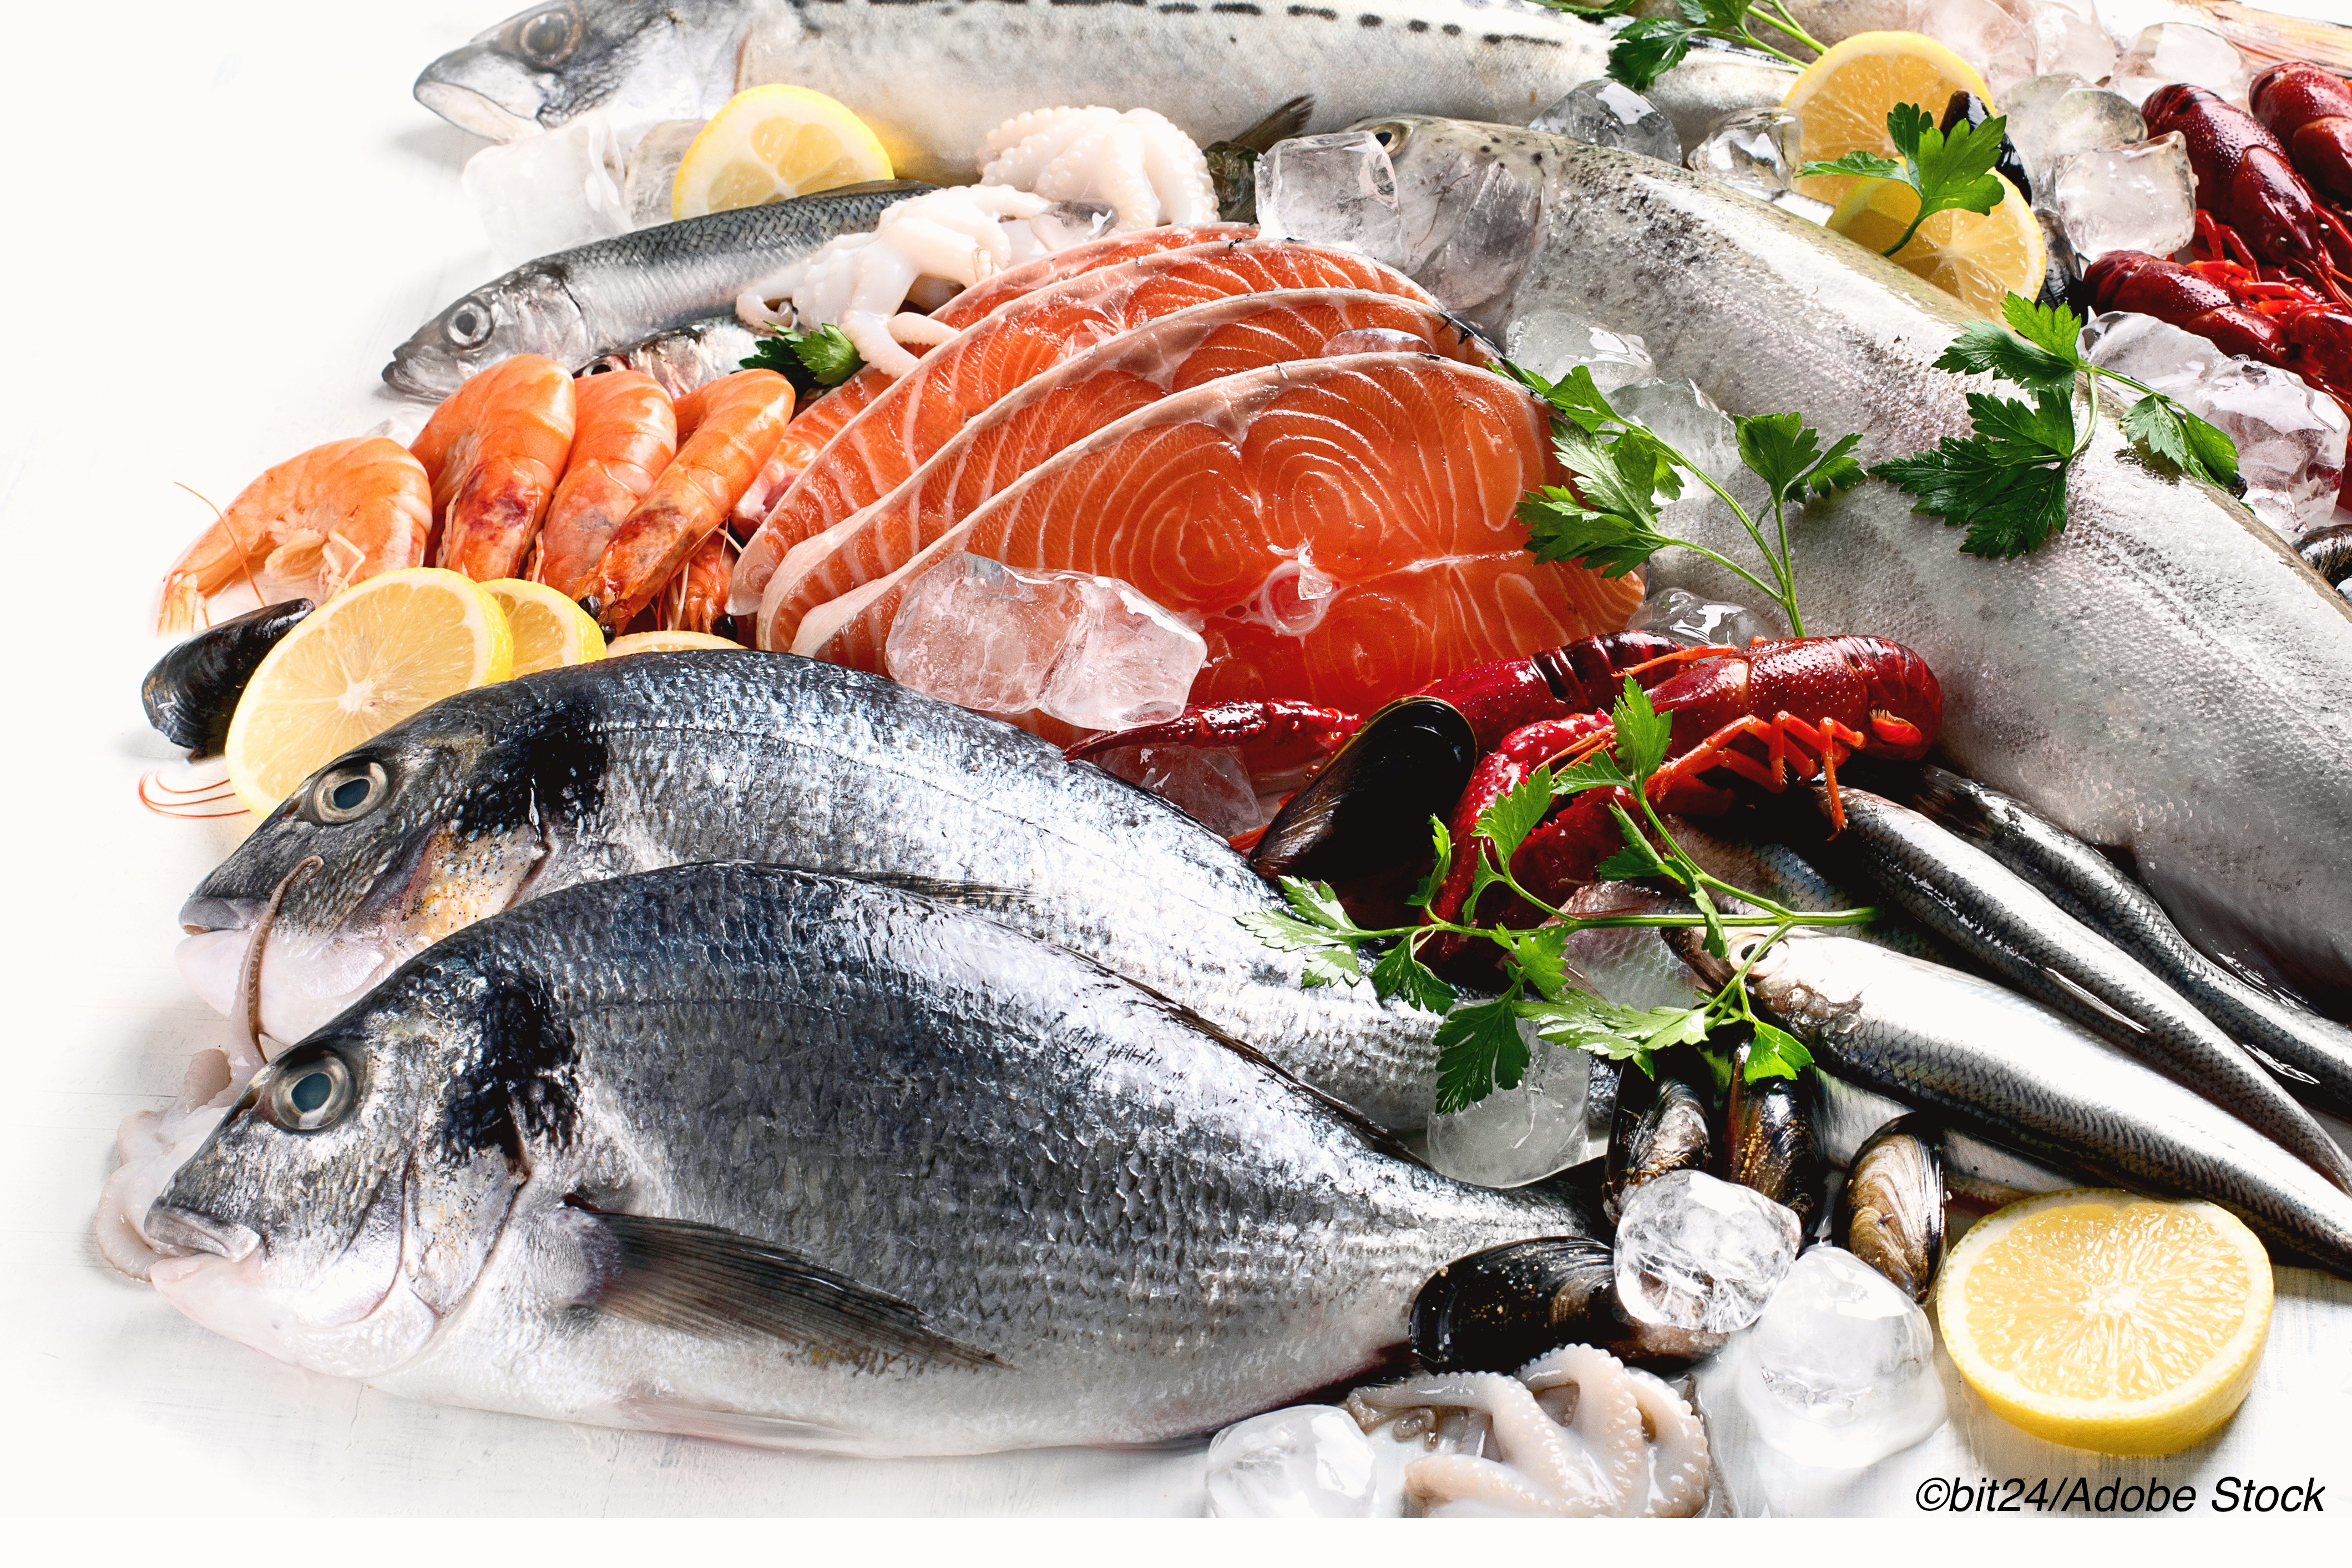 Fish Cuts Mortality Among Patients with Previous CVD